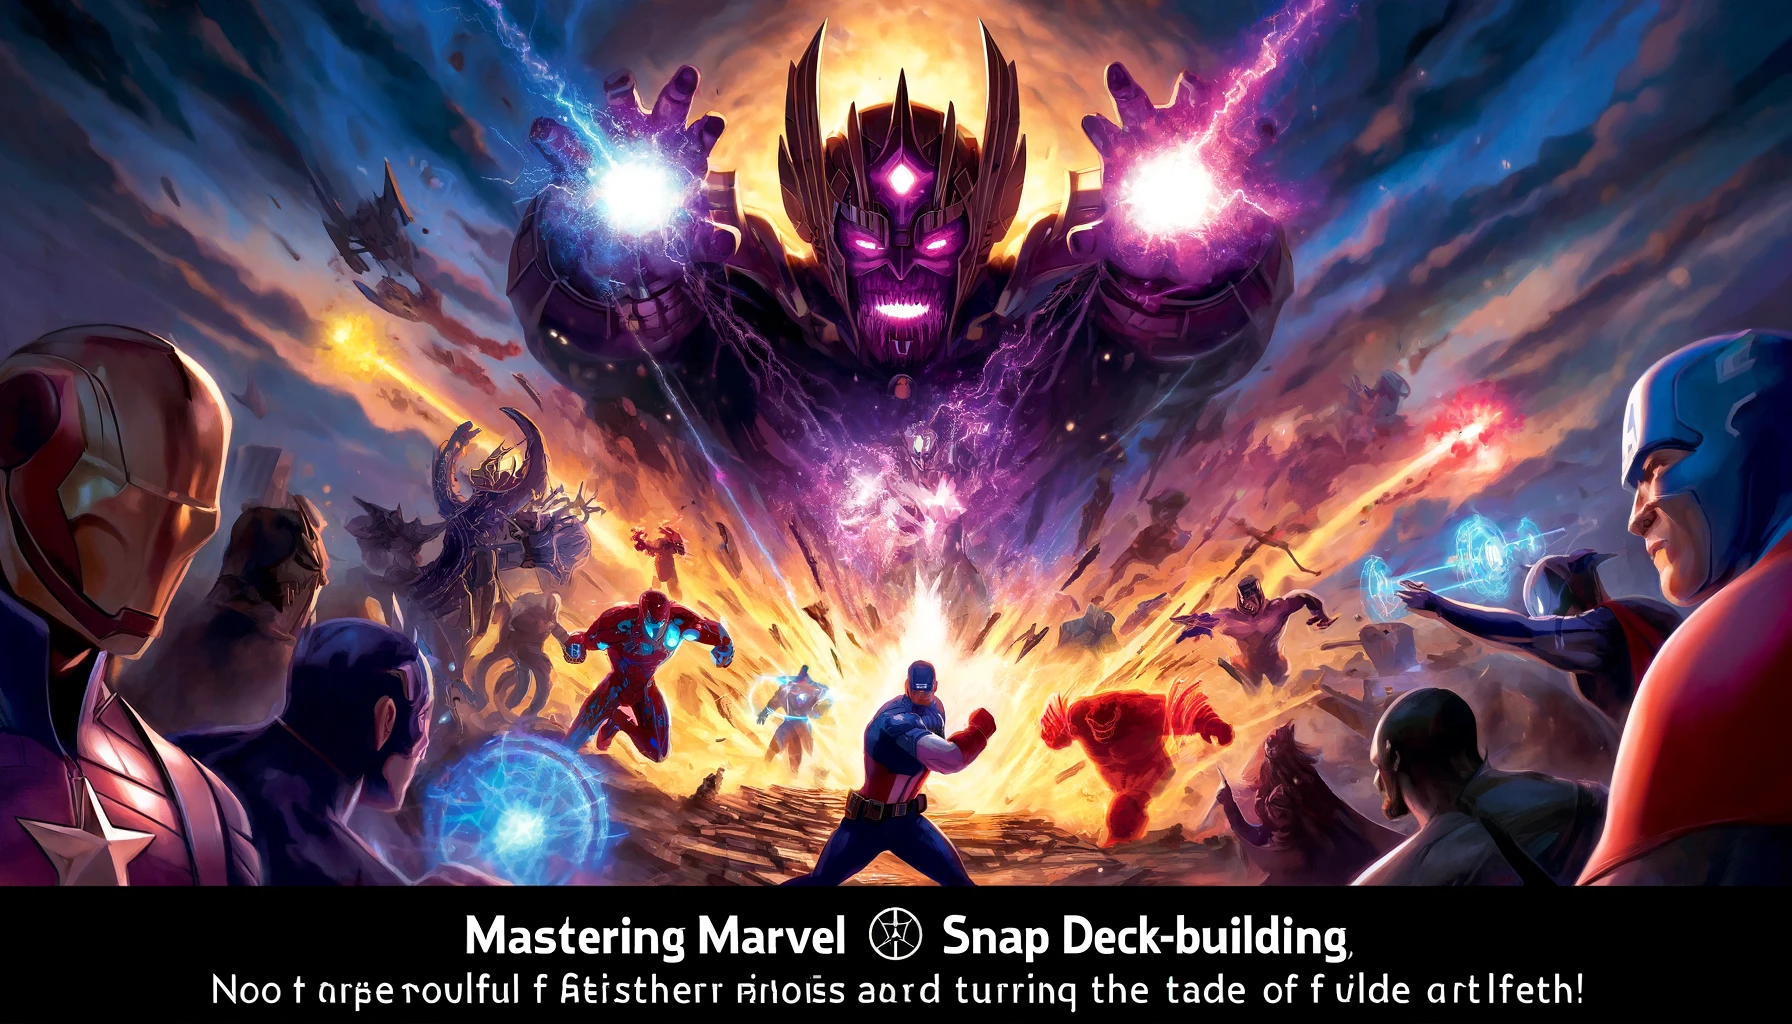 A thrilling depiction of Finisher Cards in Marvel Snap, showcasing a dramatic battle scene where powerful Marvel characters execute game-changing moves on a vividly illustrated battlefield, emphasizing the strategic climax of deck-building.